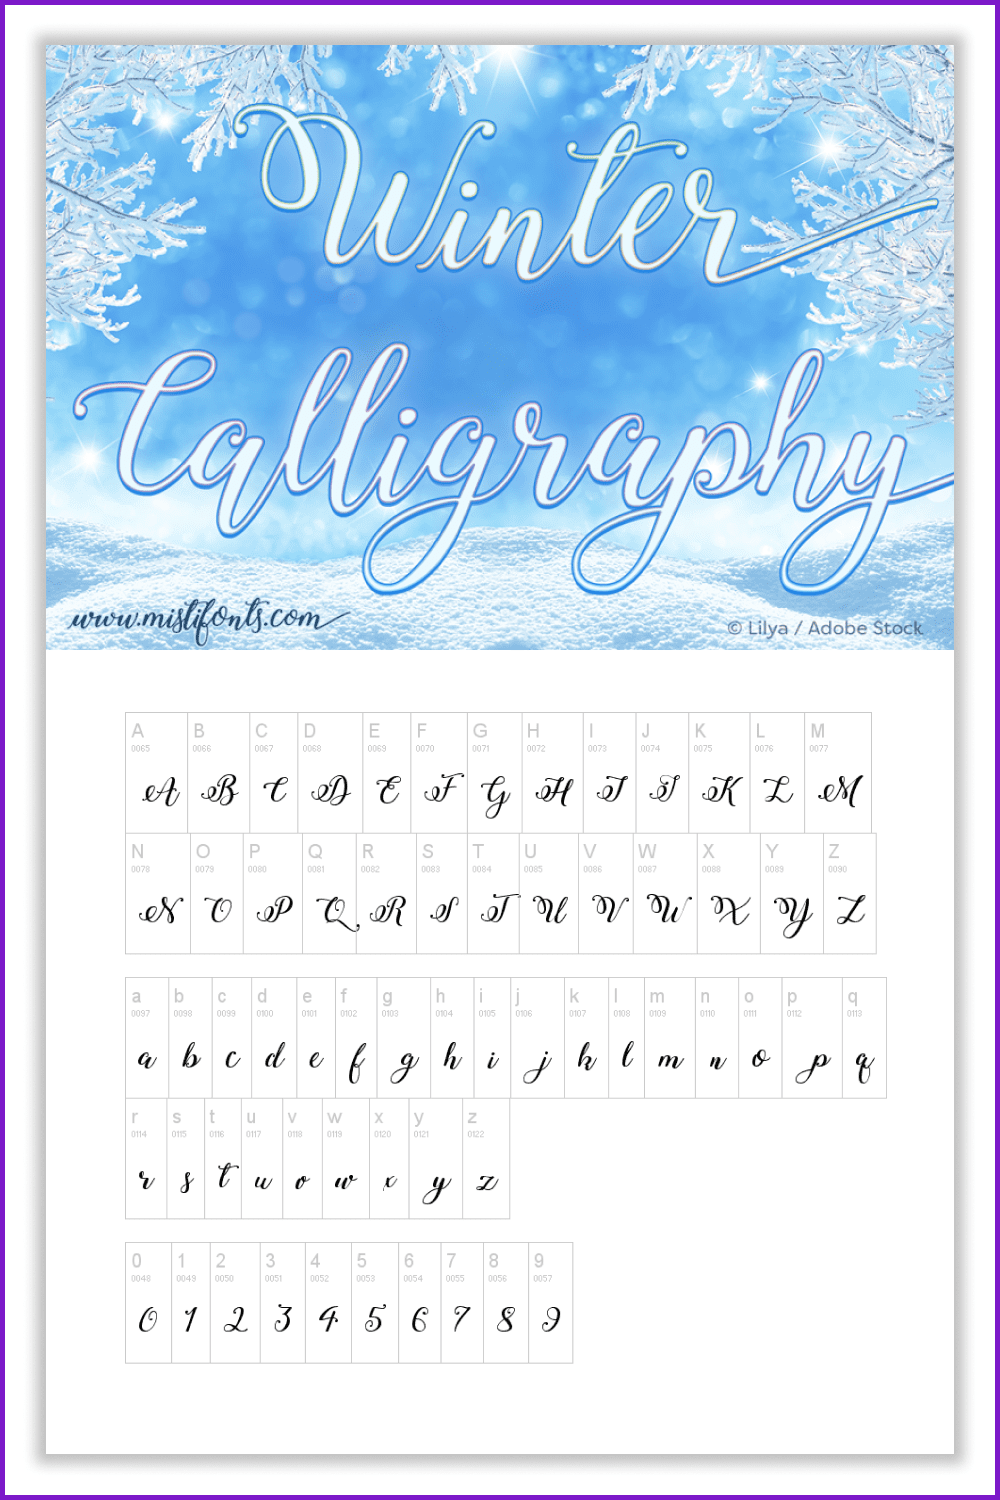 Alphabet with calligraphic font isolated on white background.